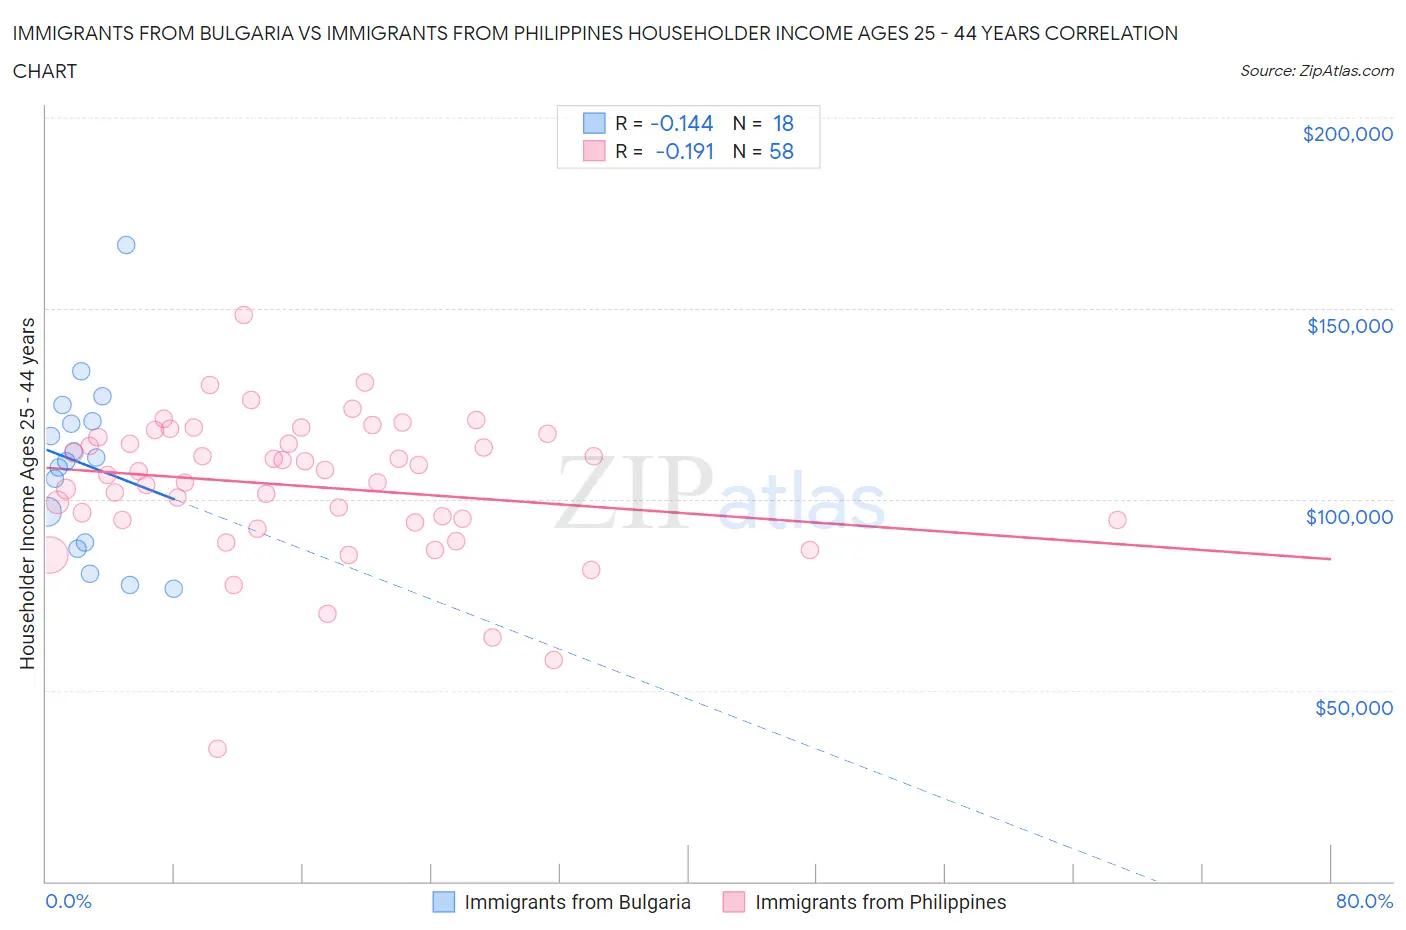 Immigrants from Bulgaria vs Immigrants from Philippines Householder Income Ages 25 - 44 years